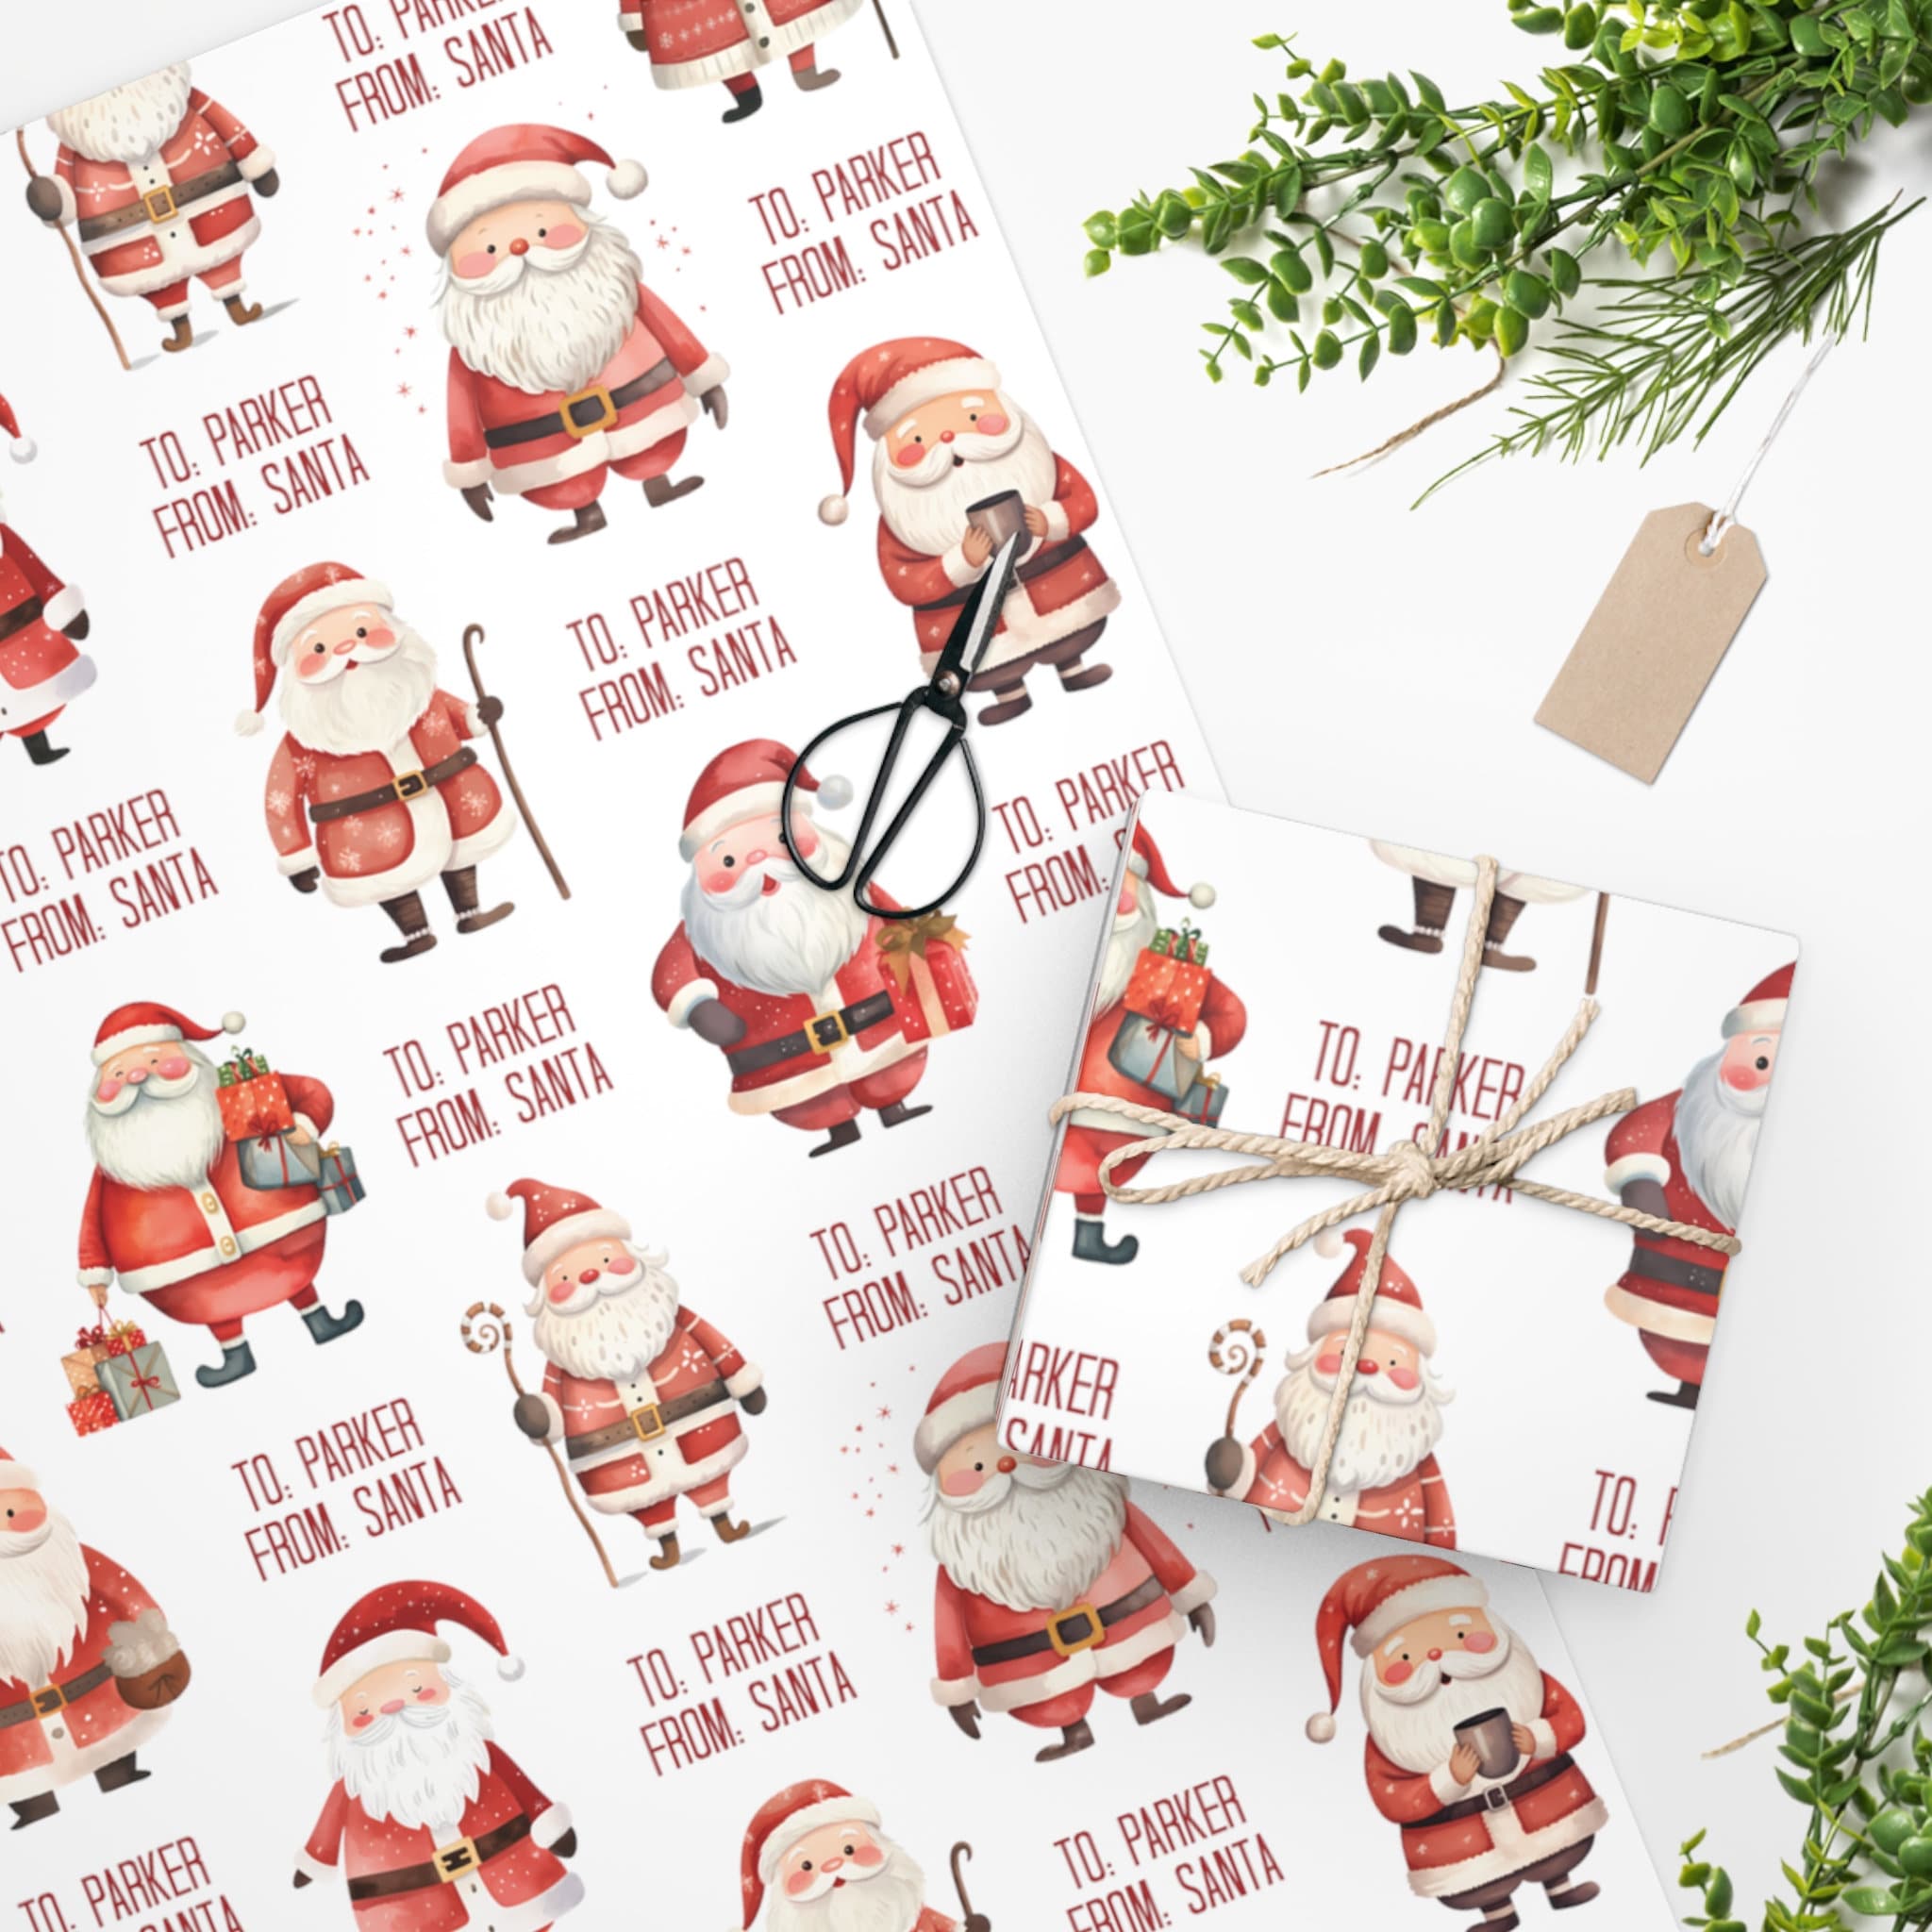 Personalized From Santa Wrapping Paper. Christmas Gift Wrap. 